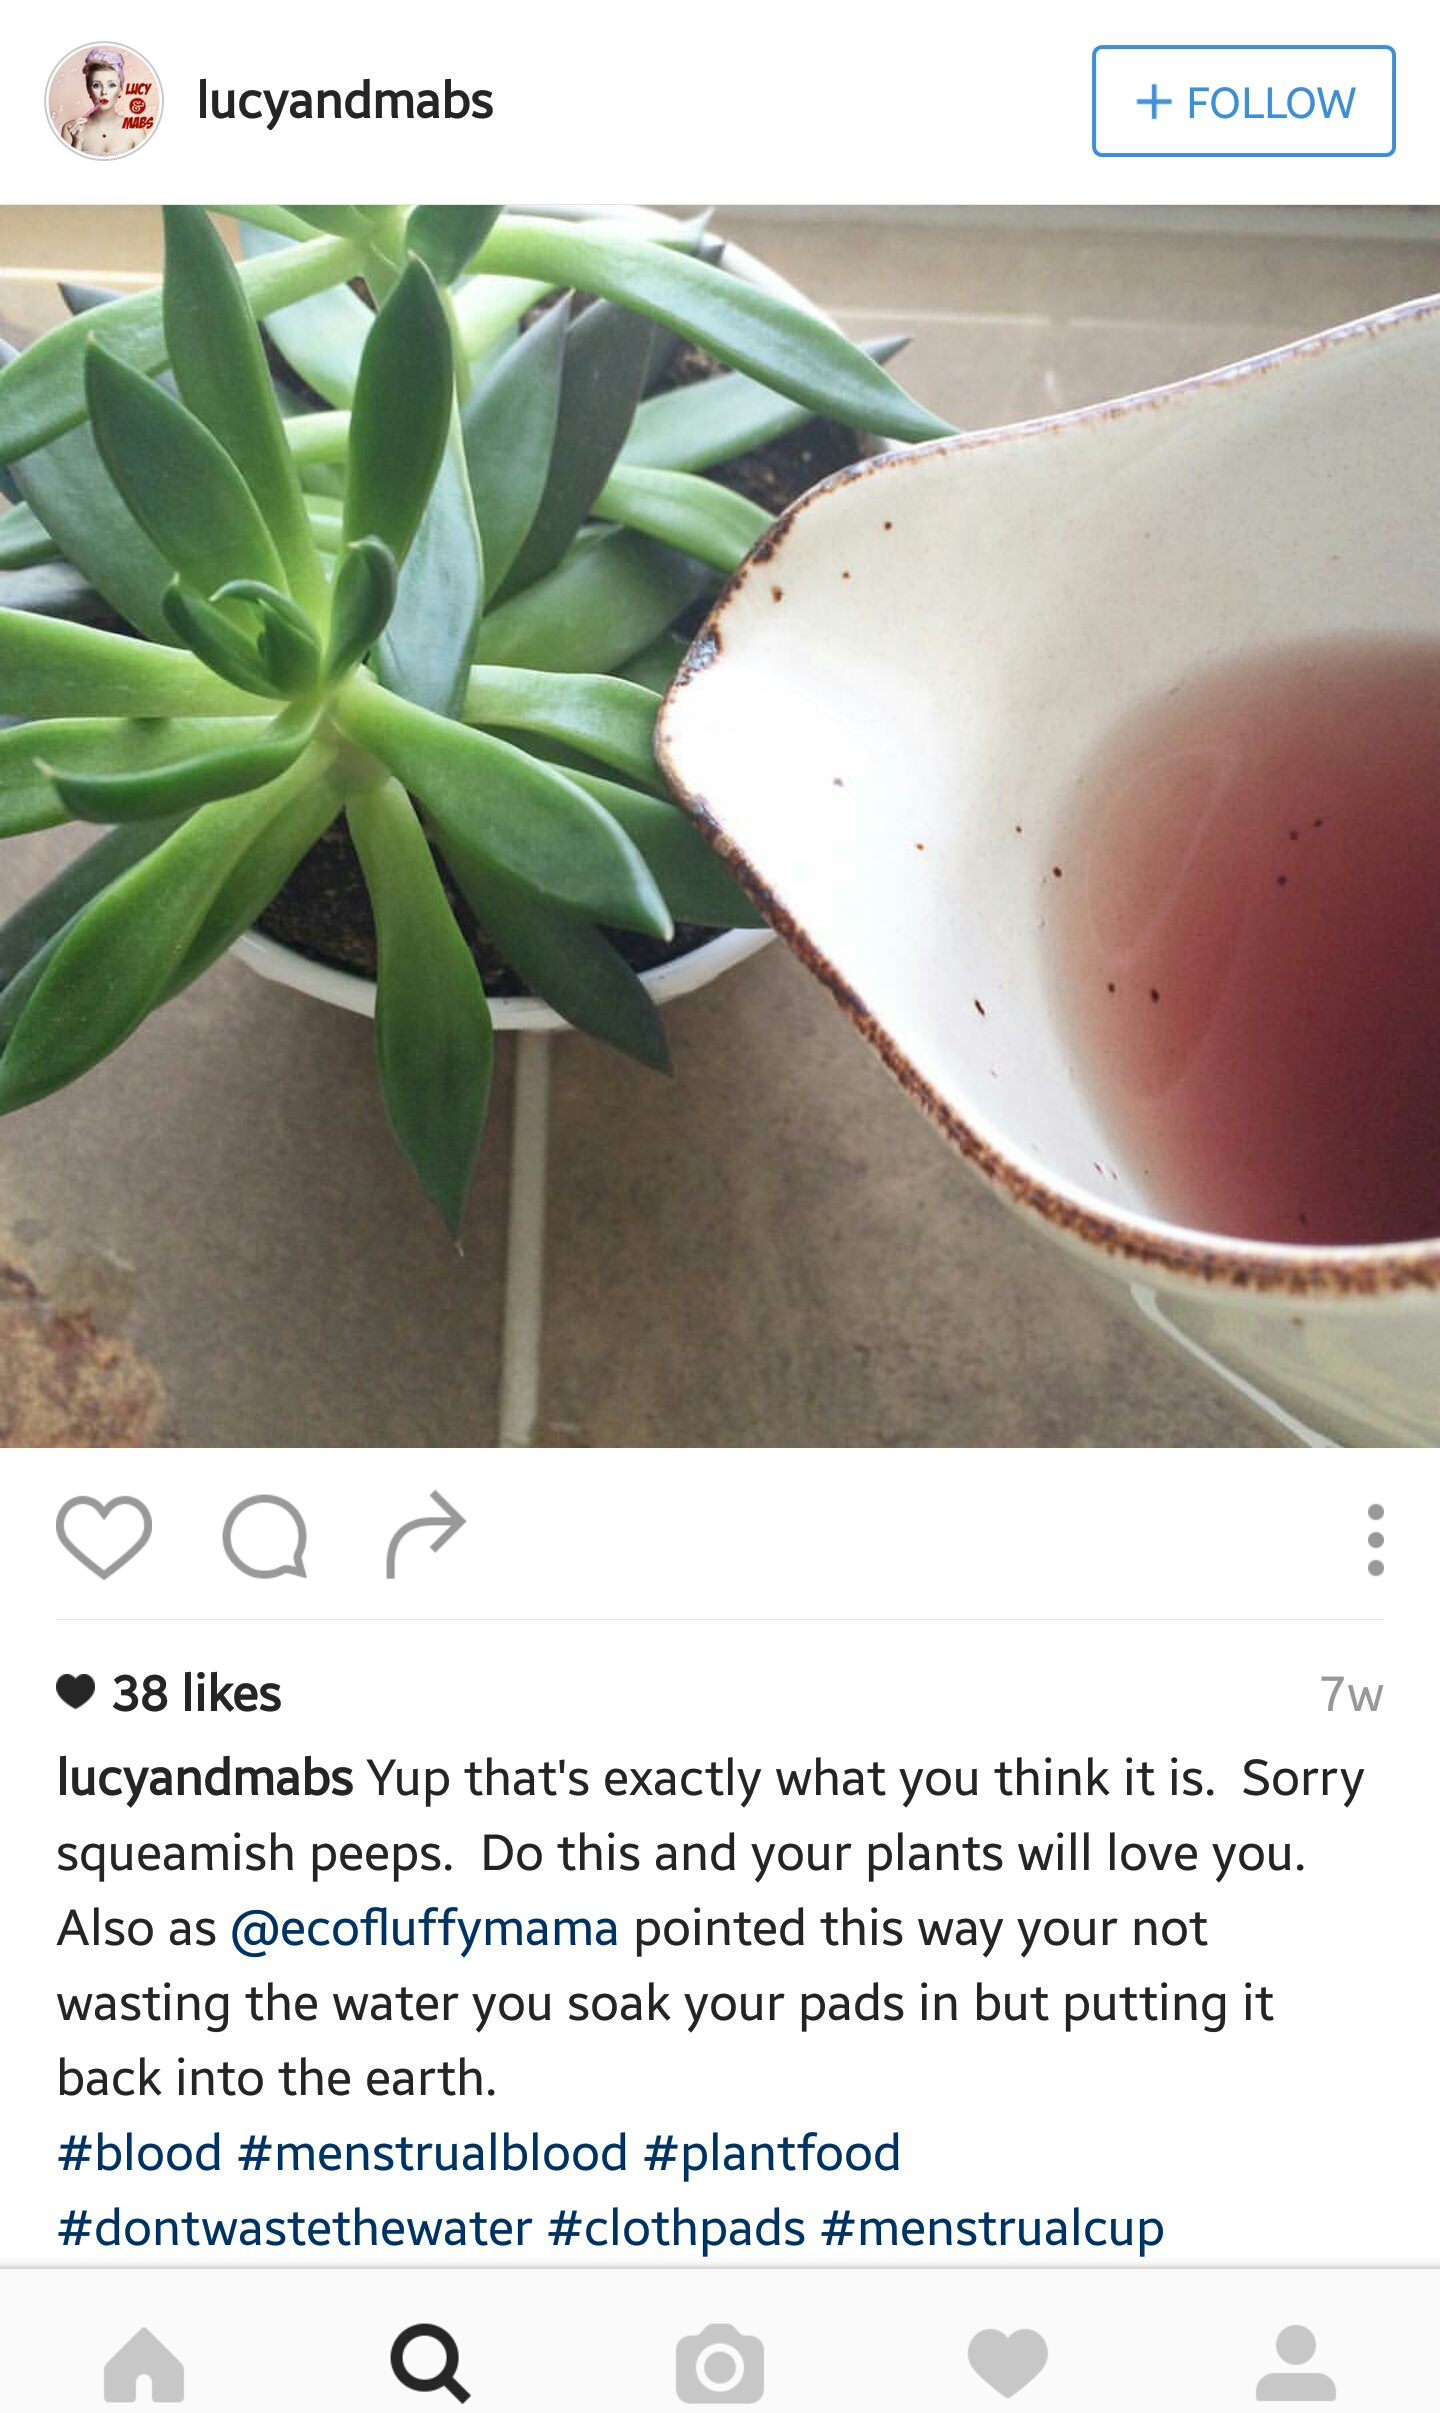 flowerpot - Sa lucyandmabs a 38 7w lucyandmabs Yup that's exactly what you think it is. Sorry squeamish peeps. Do this and your plants will love you. Also as pointed this way your not wasting the water you soak your pads in but putting it back into the ea